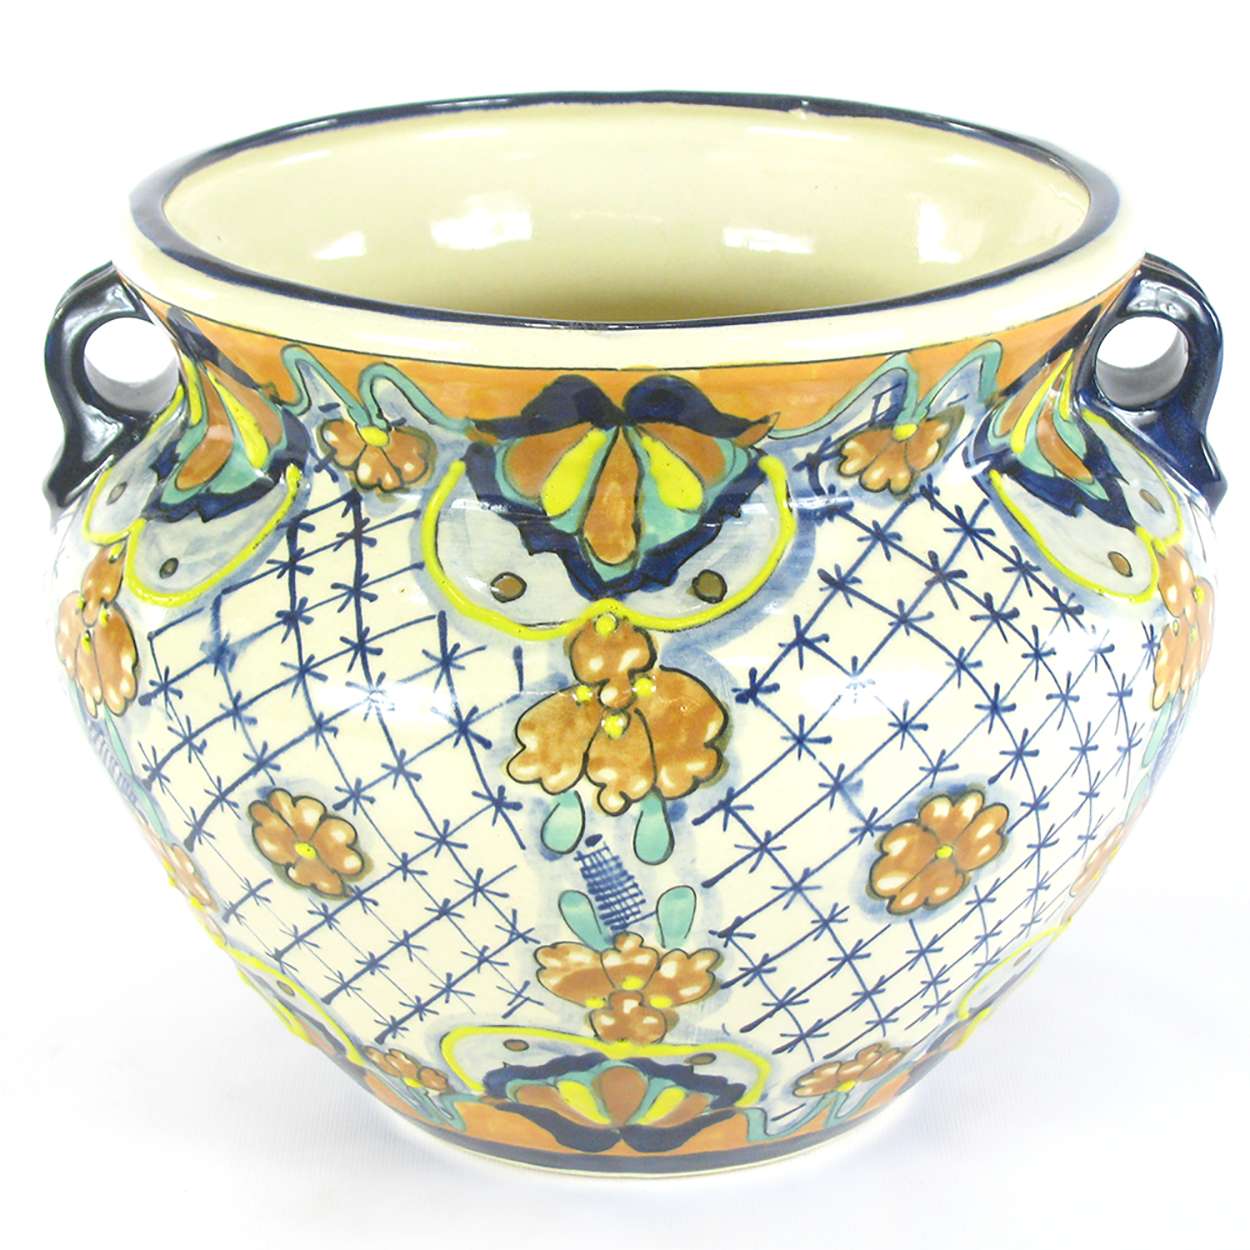 12in Talavera Pottery Planter - Small - Flowers and Stars